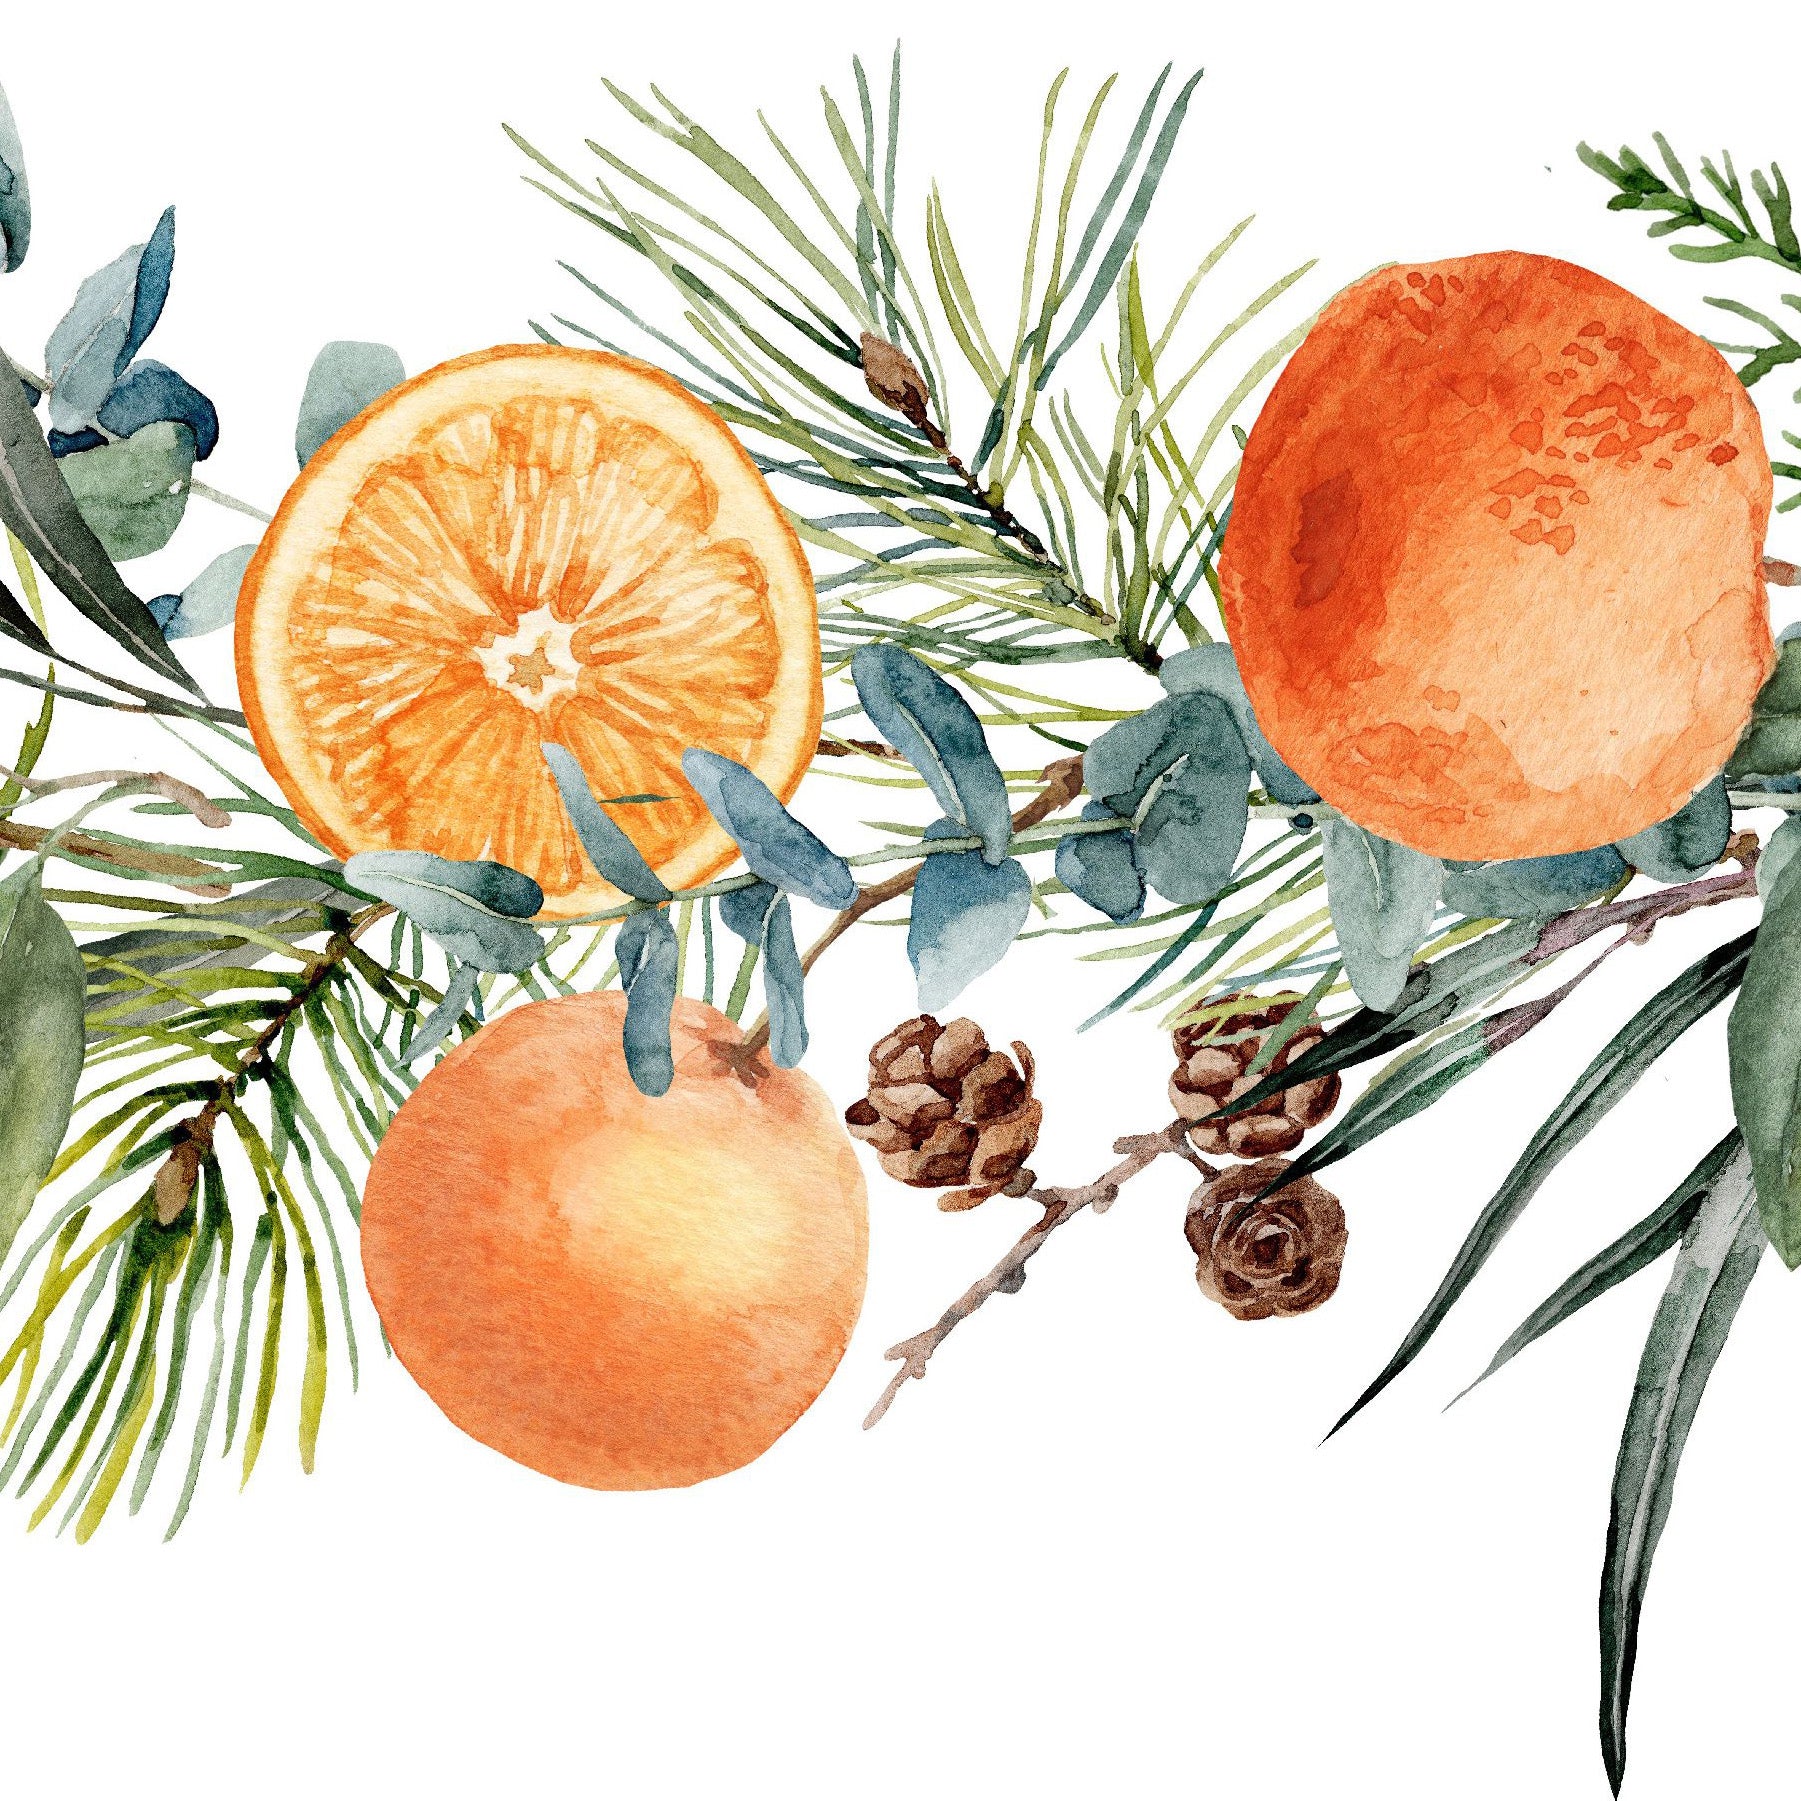 Holiday boughts with oranges, pine cones and evergreens-shop for Puffin Gear hats and blankets at The Orange Room